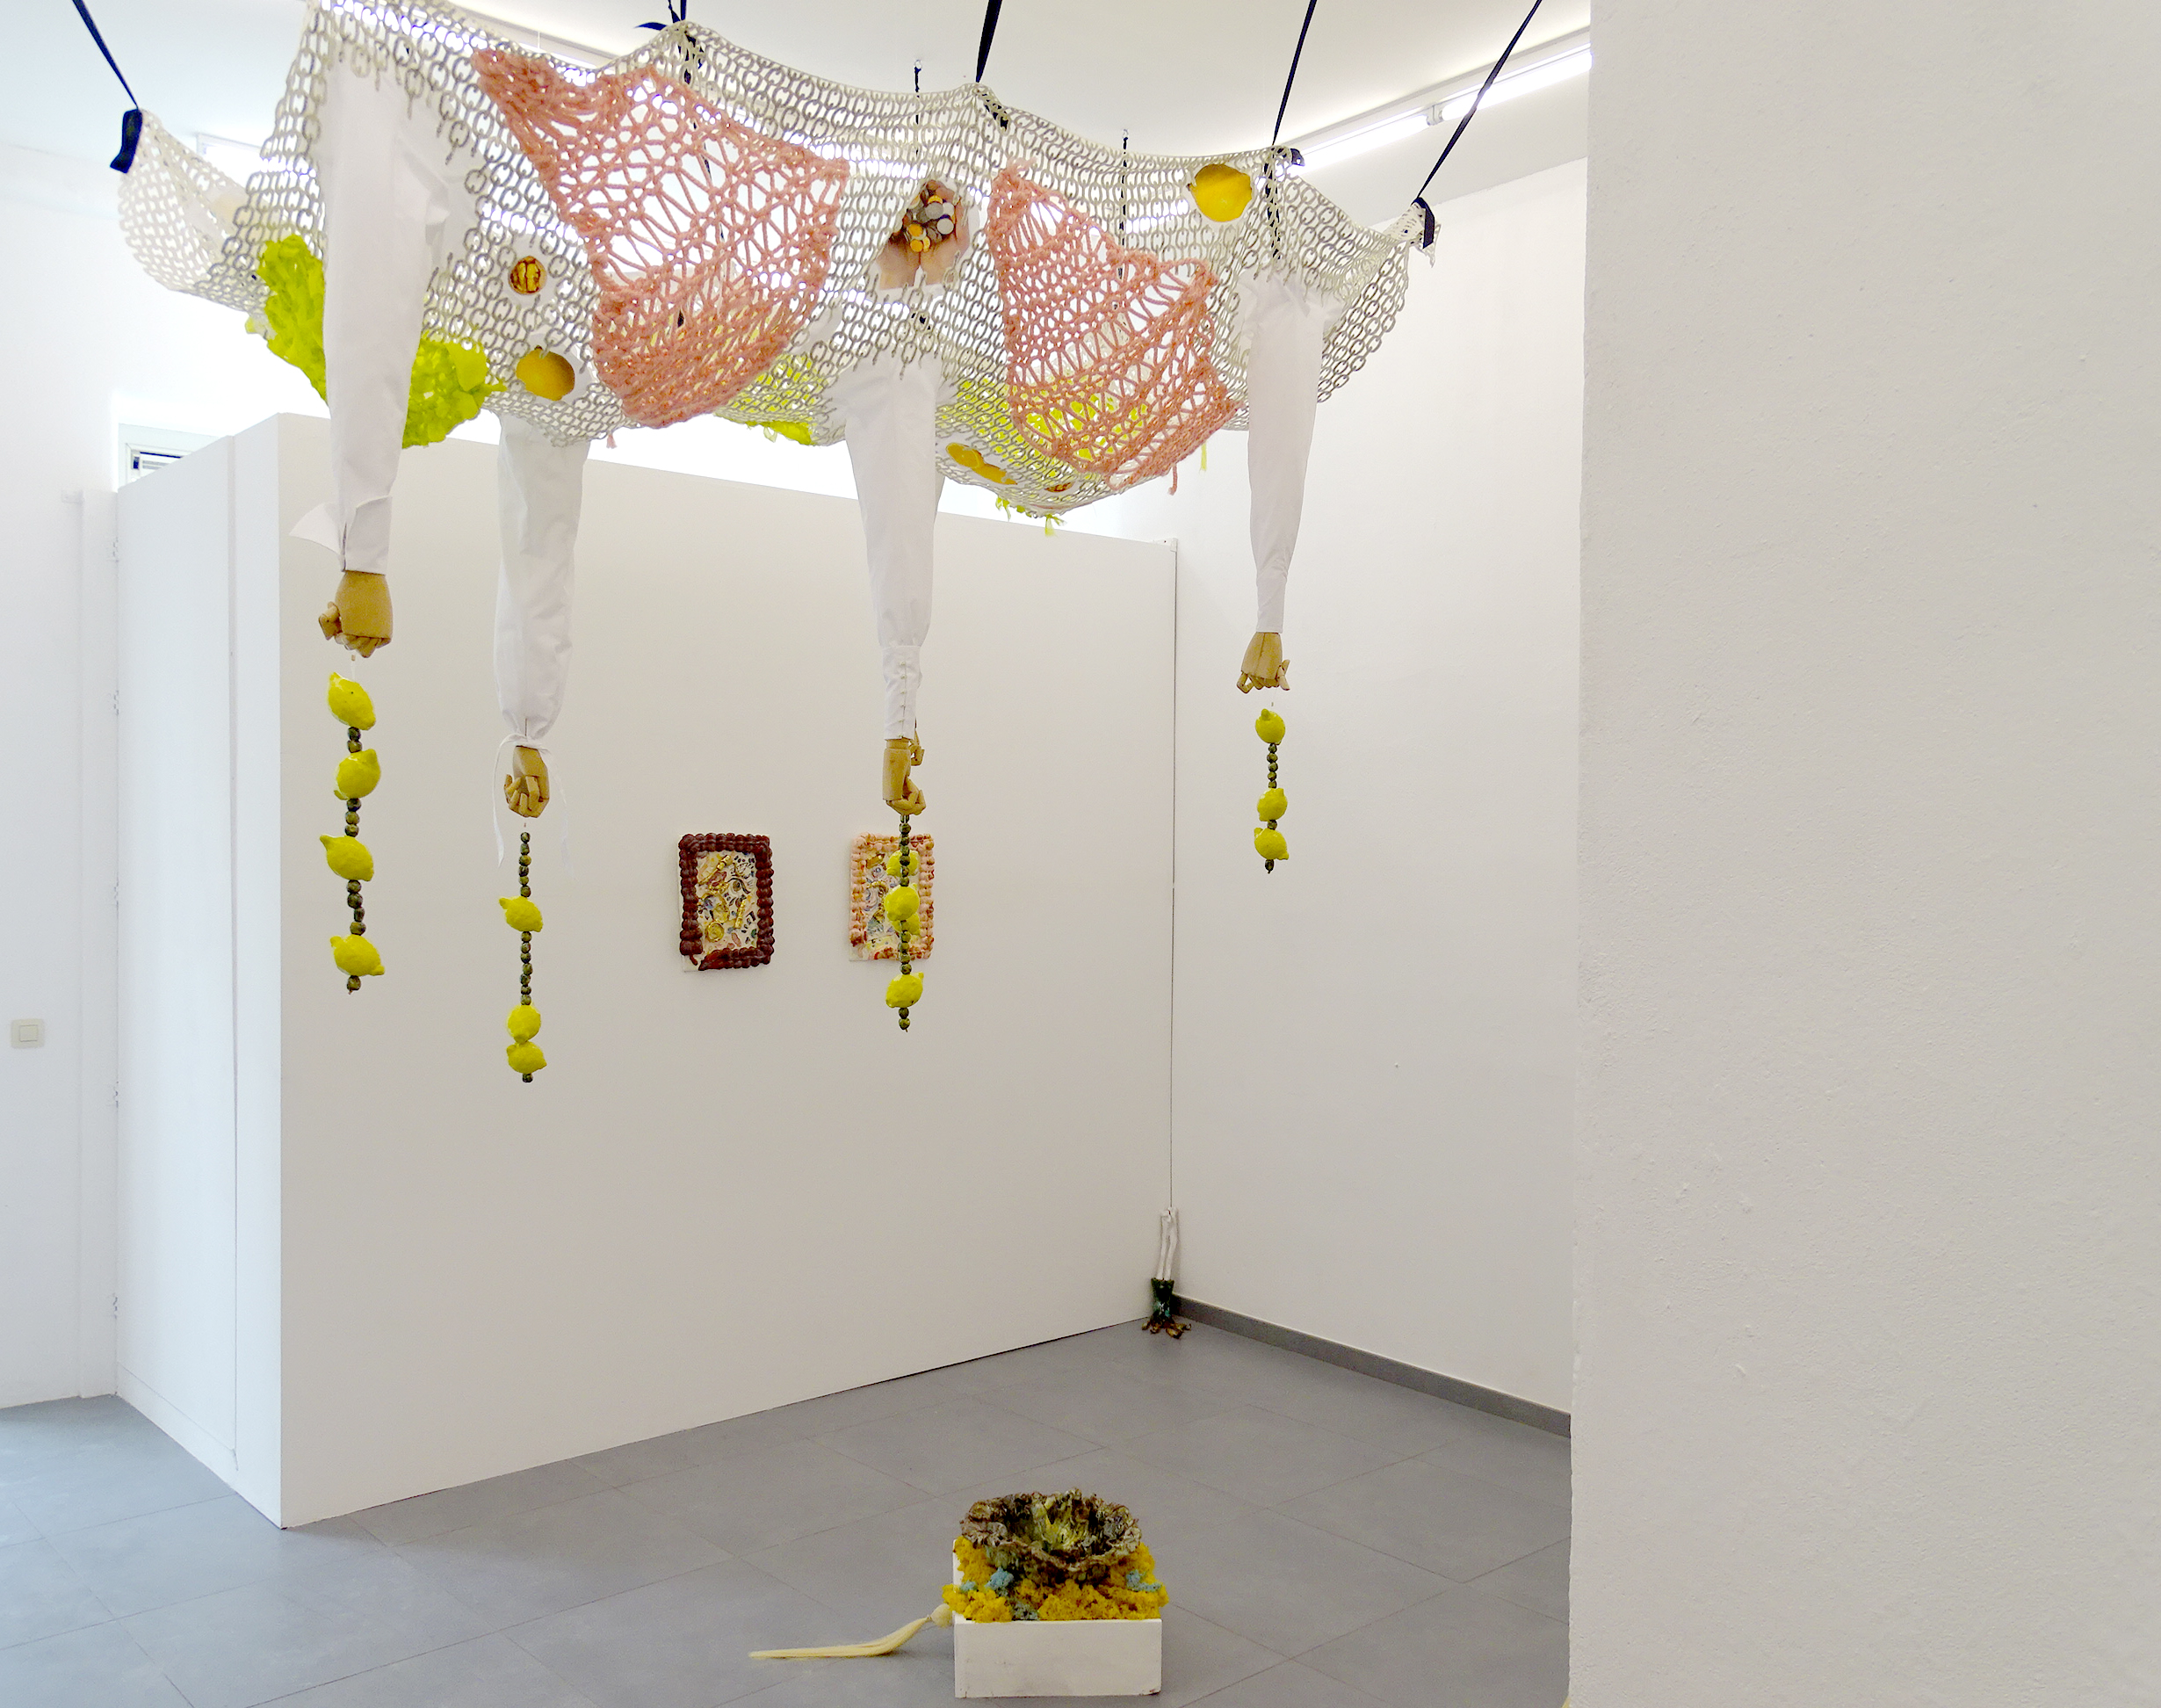 (02) Of All the Things I’ve Lost Proudick (Lindsey Mendick & Paloma Proudfoot) Installation view Hannah Barry Gallery at Ballon Rouge Club Brussels 2019  courtesy Hannah Barry Gallery.jpg